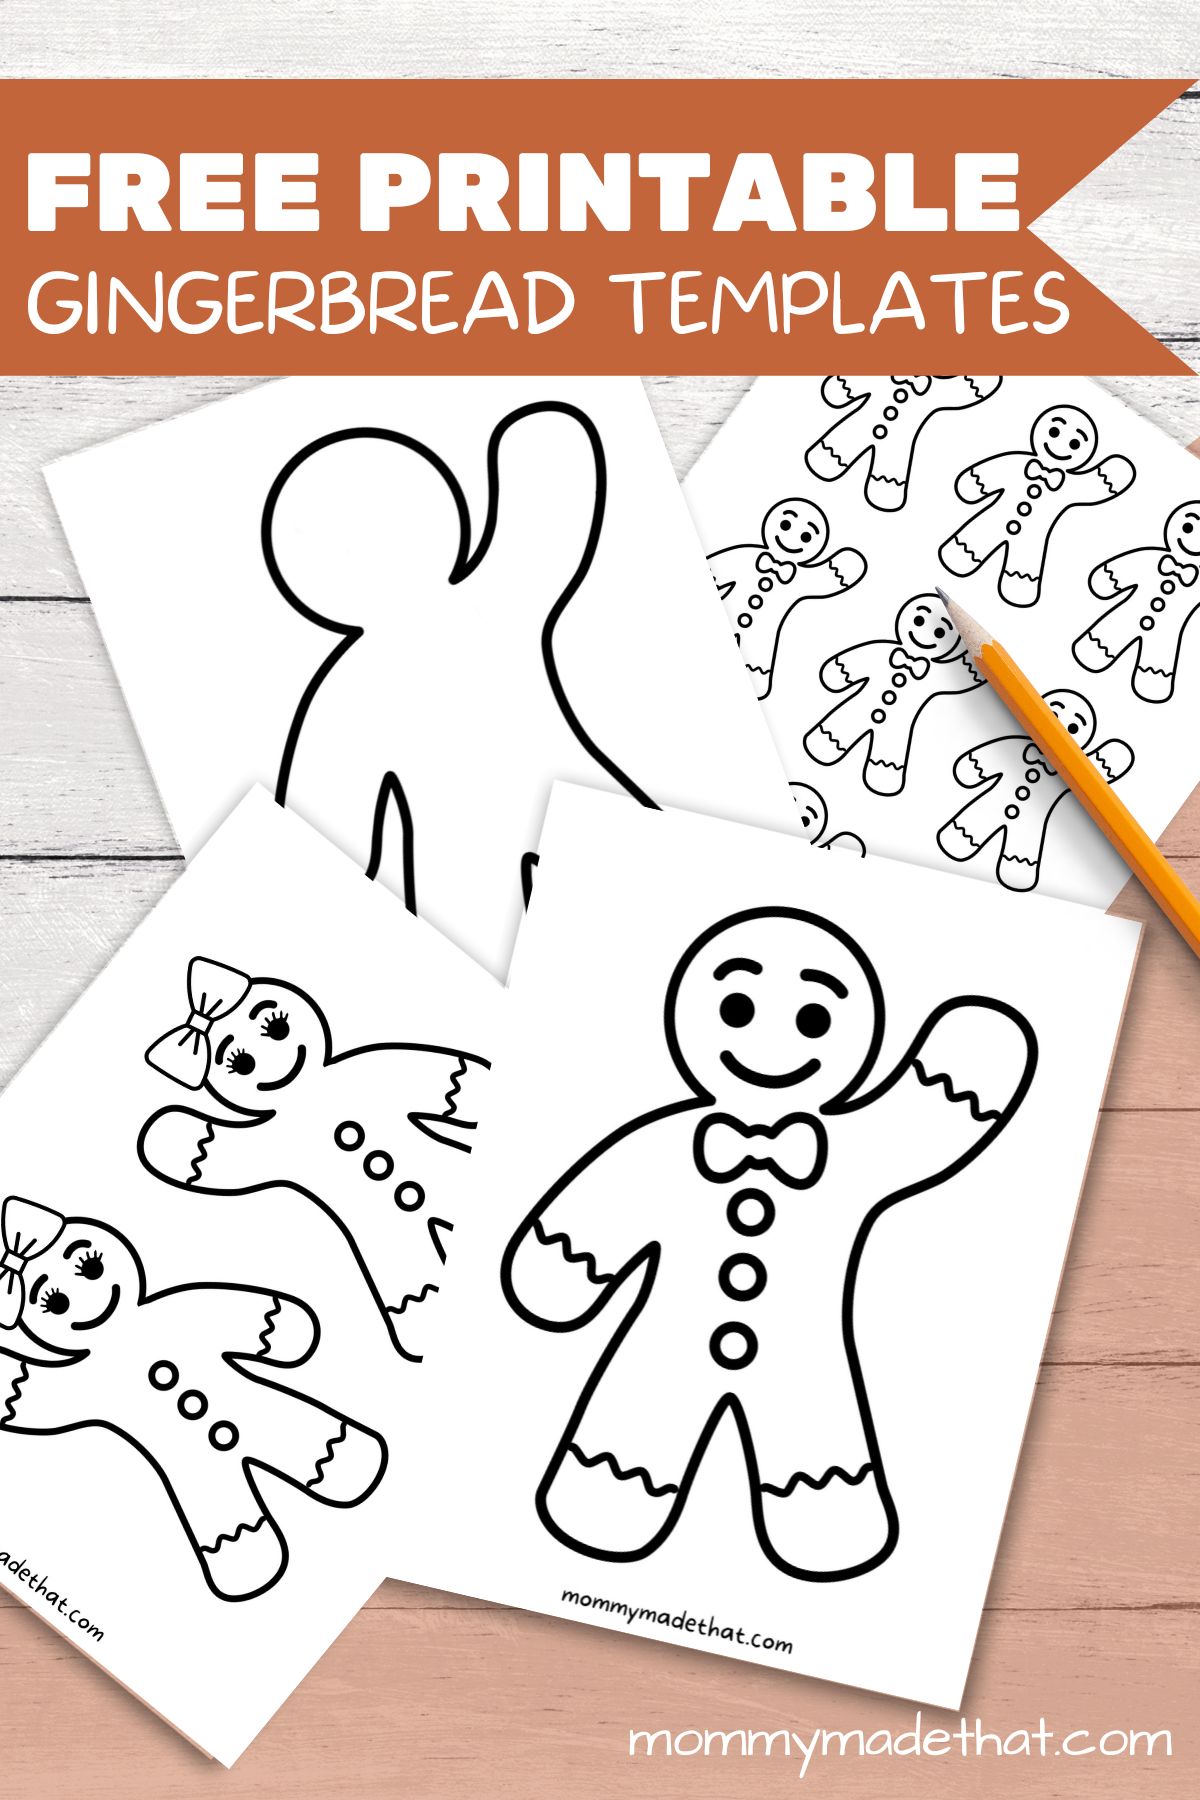 Gingerbread man templates gingerbread girl too free printables